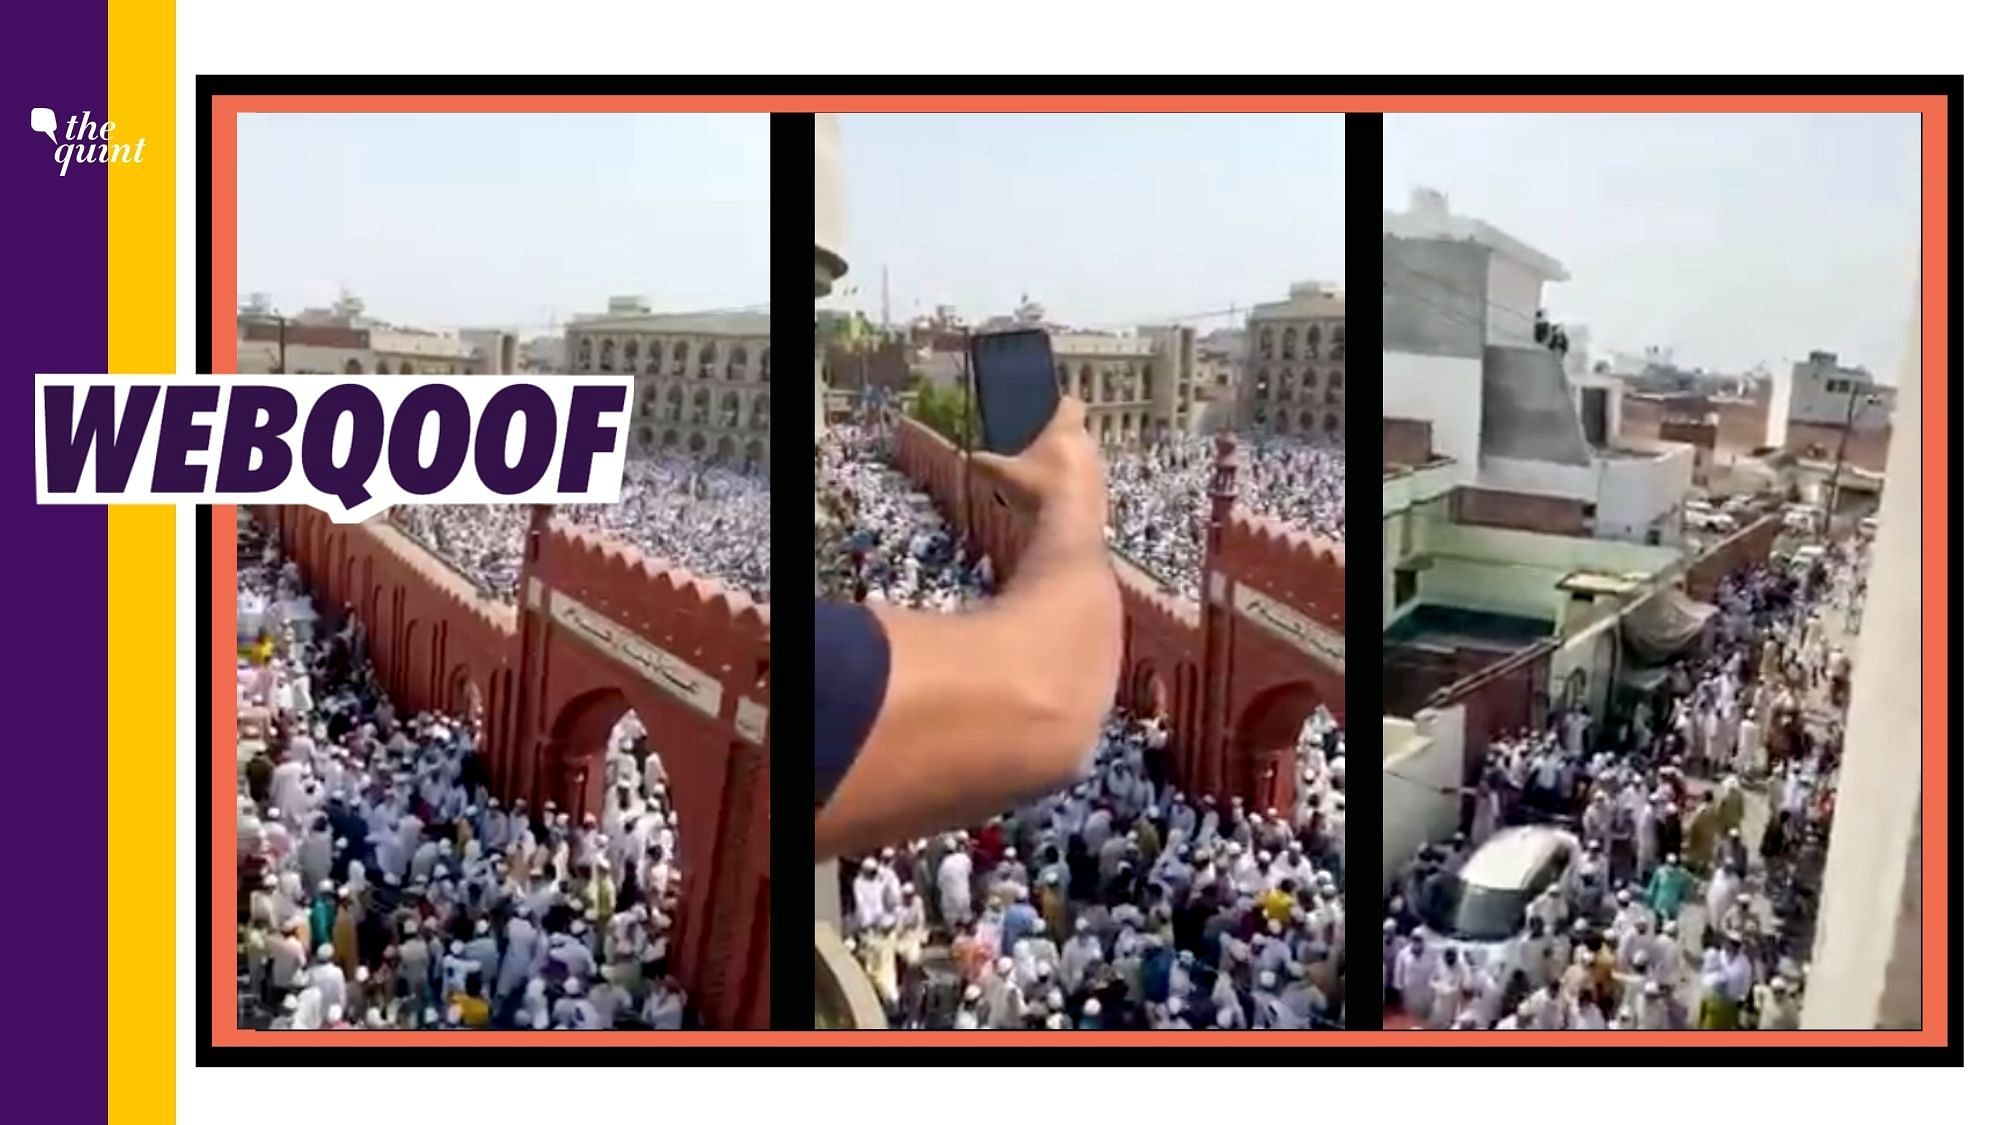 Video showing a huge gathering at a funeral procession in a Madrasa in Uttar Pradesh’s Sambhal is being shared with a claim that it is from an Iftar party in Hyderabad.